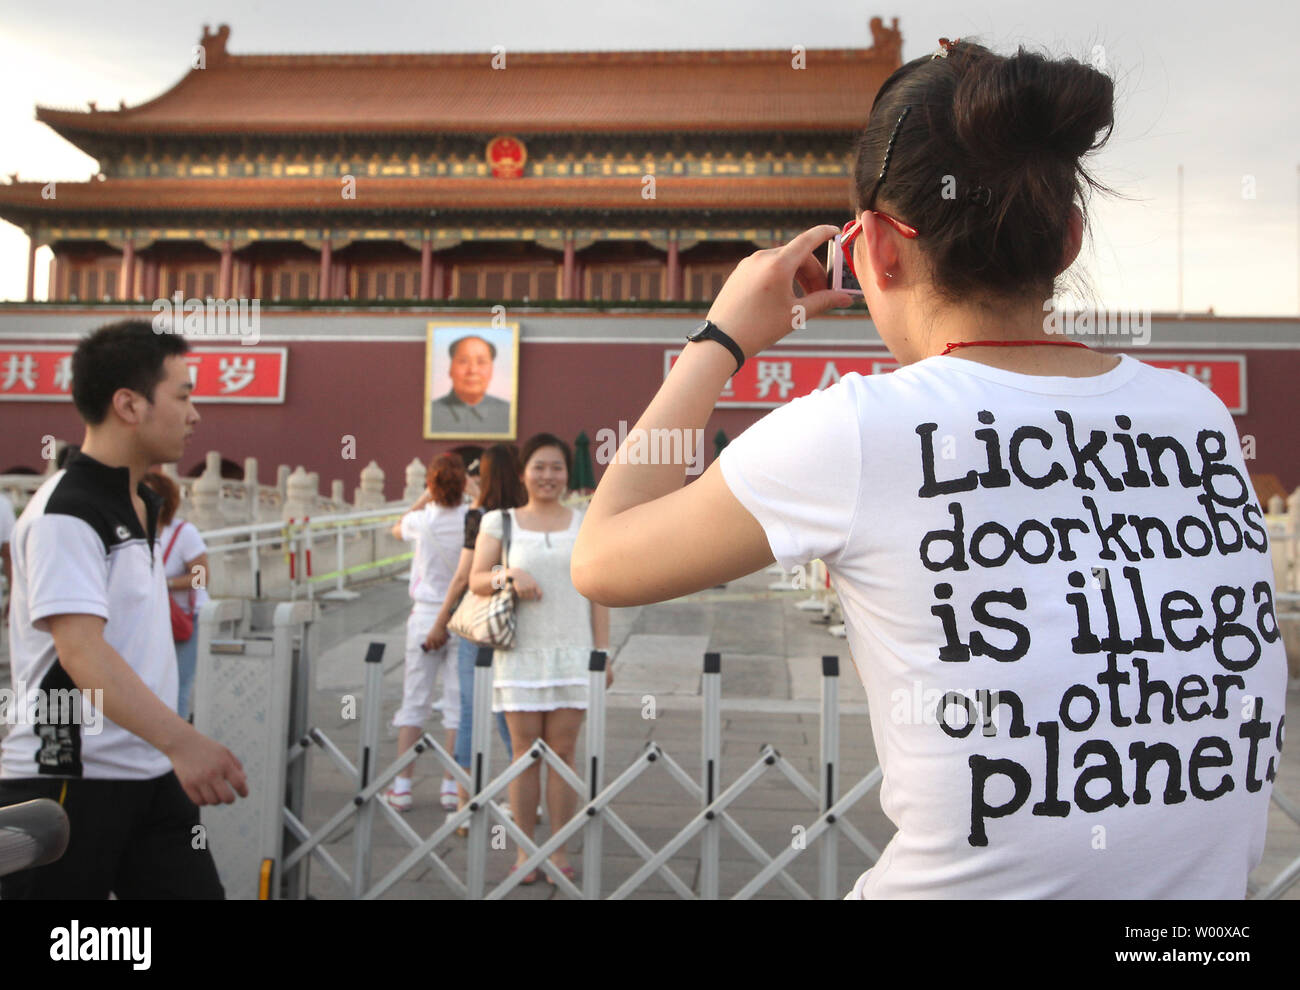 A Chinese tourist takes a photograph of Tiananmen Square's north rostrum, featuring a giant portrait of former helmsman Mao Zedong, in central Beijing on June 3, 2011.  China's capital is under heavy security in the lead up to the June 4 anniversary of the 1989 government crackdown on pro-democracy protests, which killed thousands of unarmed students.      UPI/Stephen Shaver Stock Photo